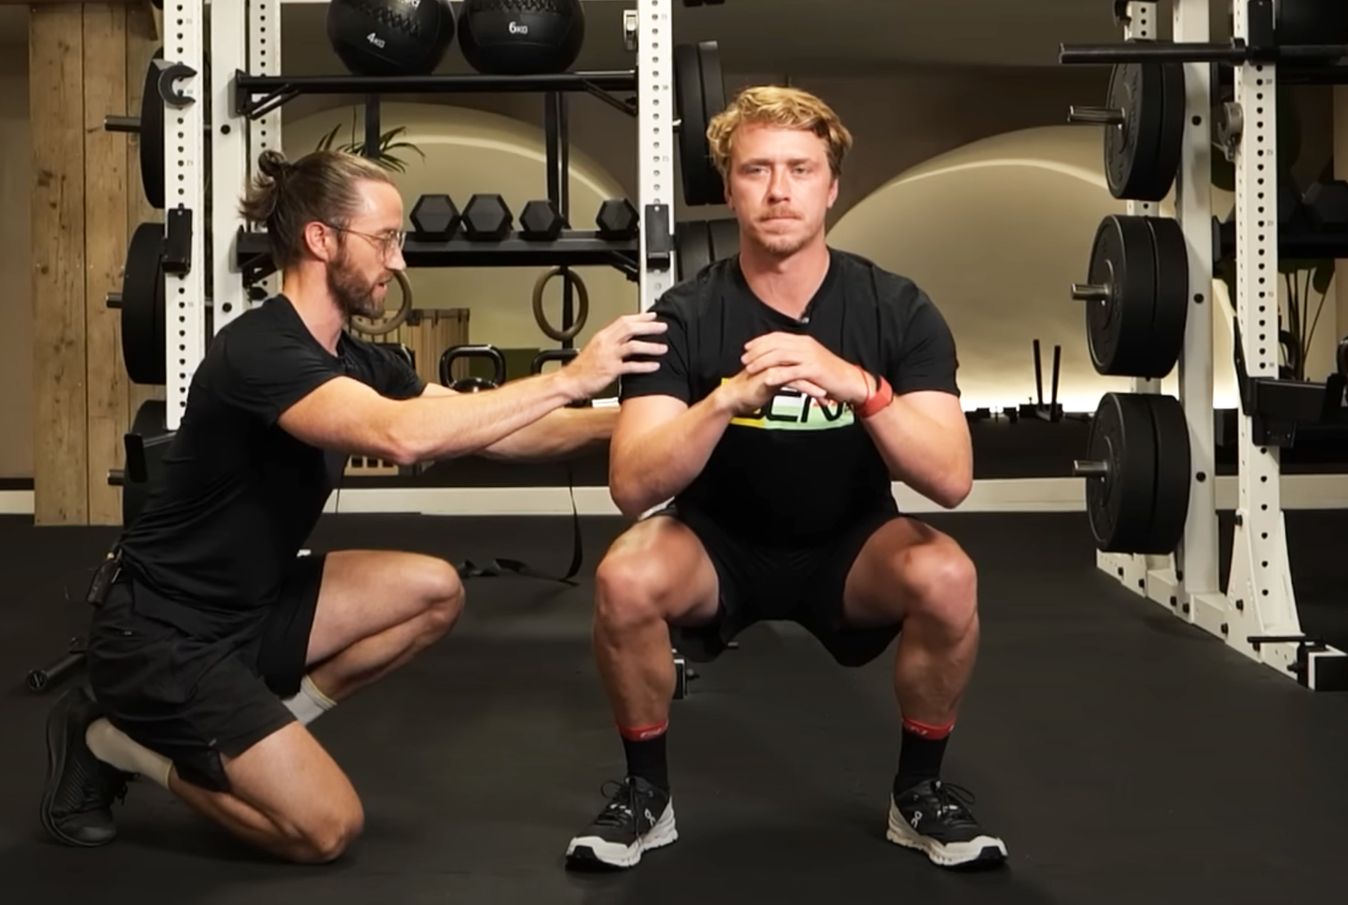 Body weight squats can improve leg strength